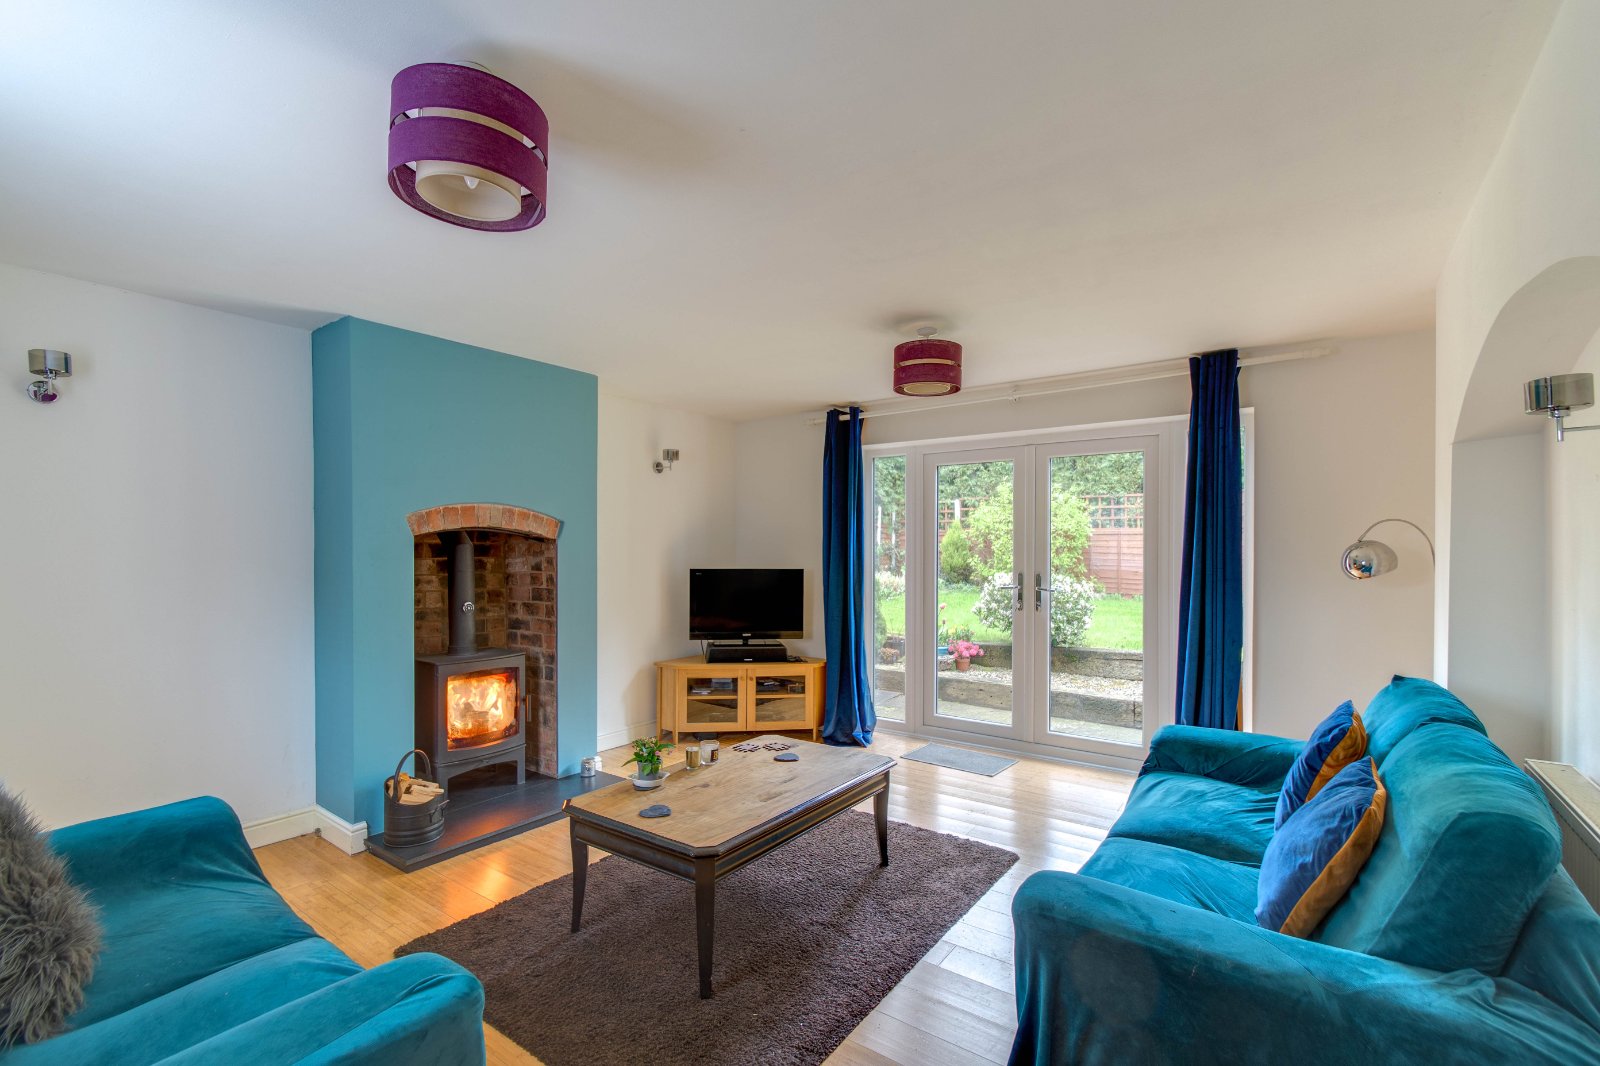 4 bed  for sale in Linthurst Road, Barnt Green  - Property Image 2